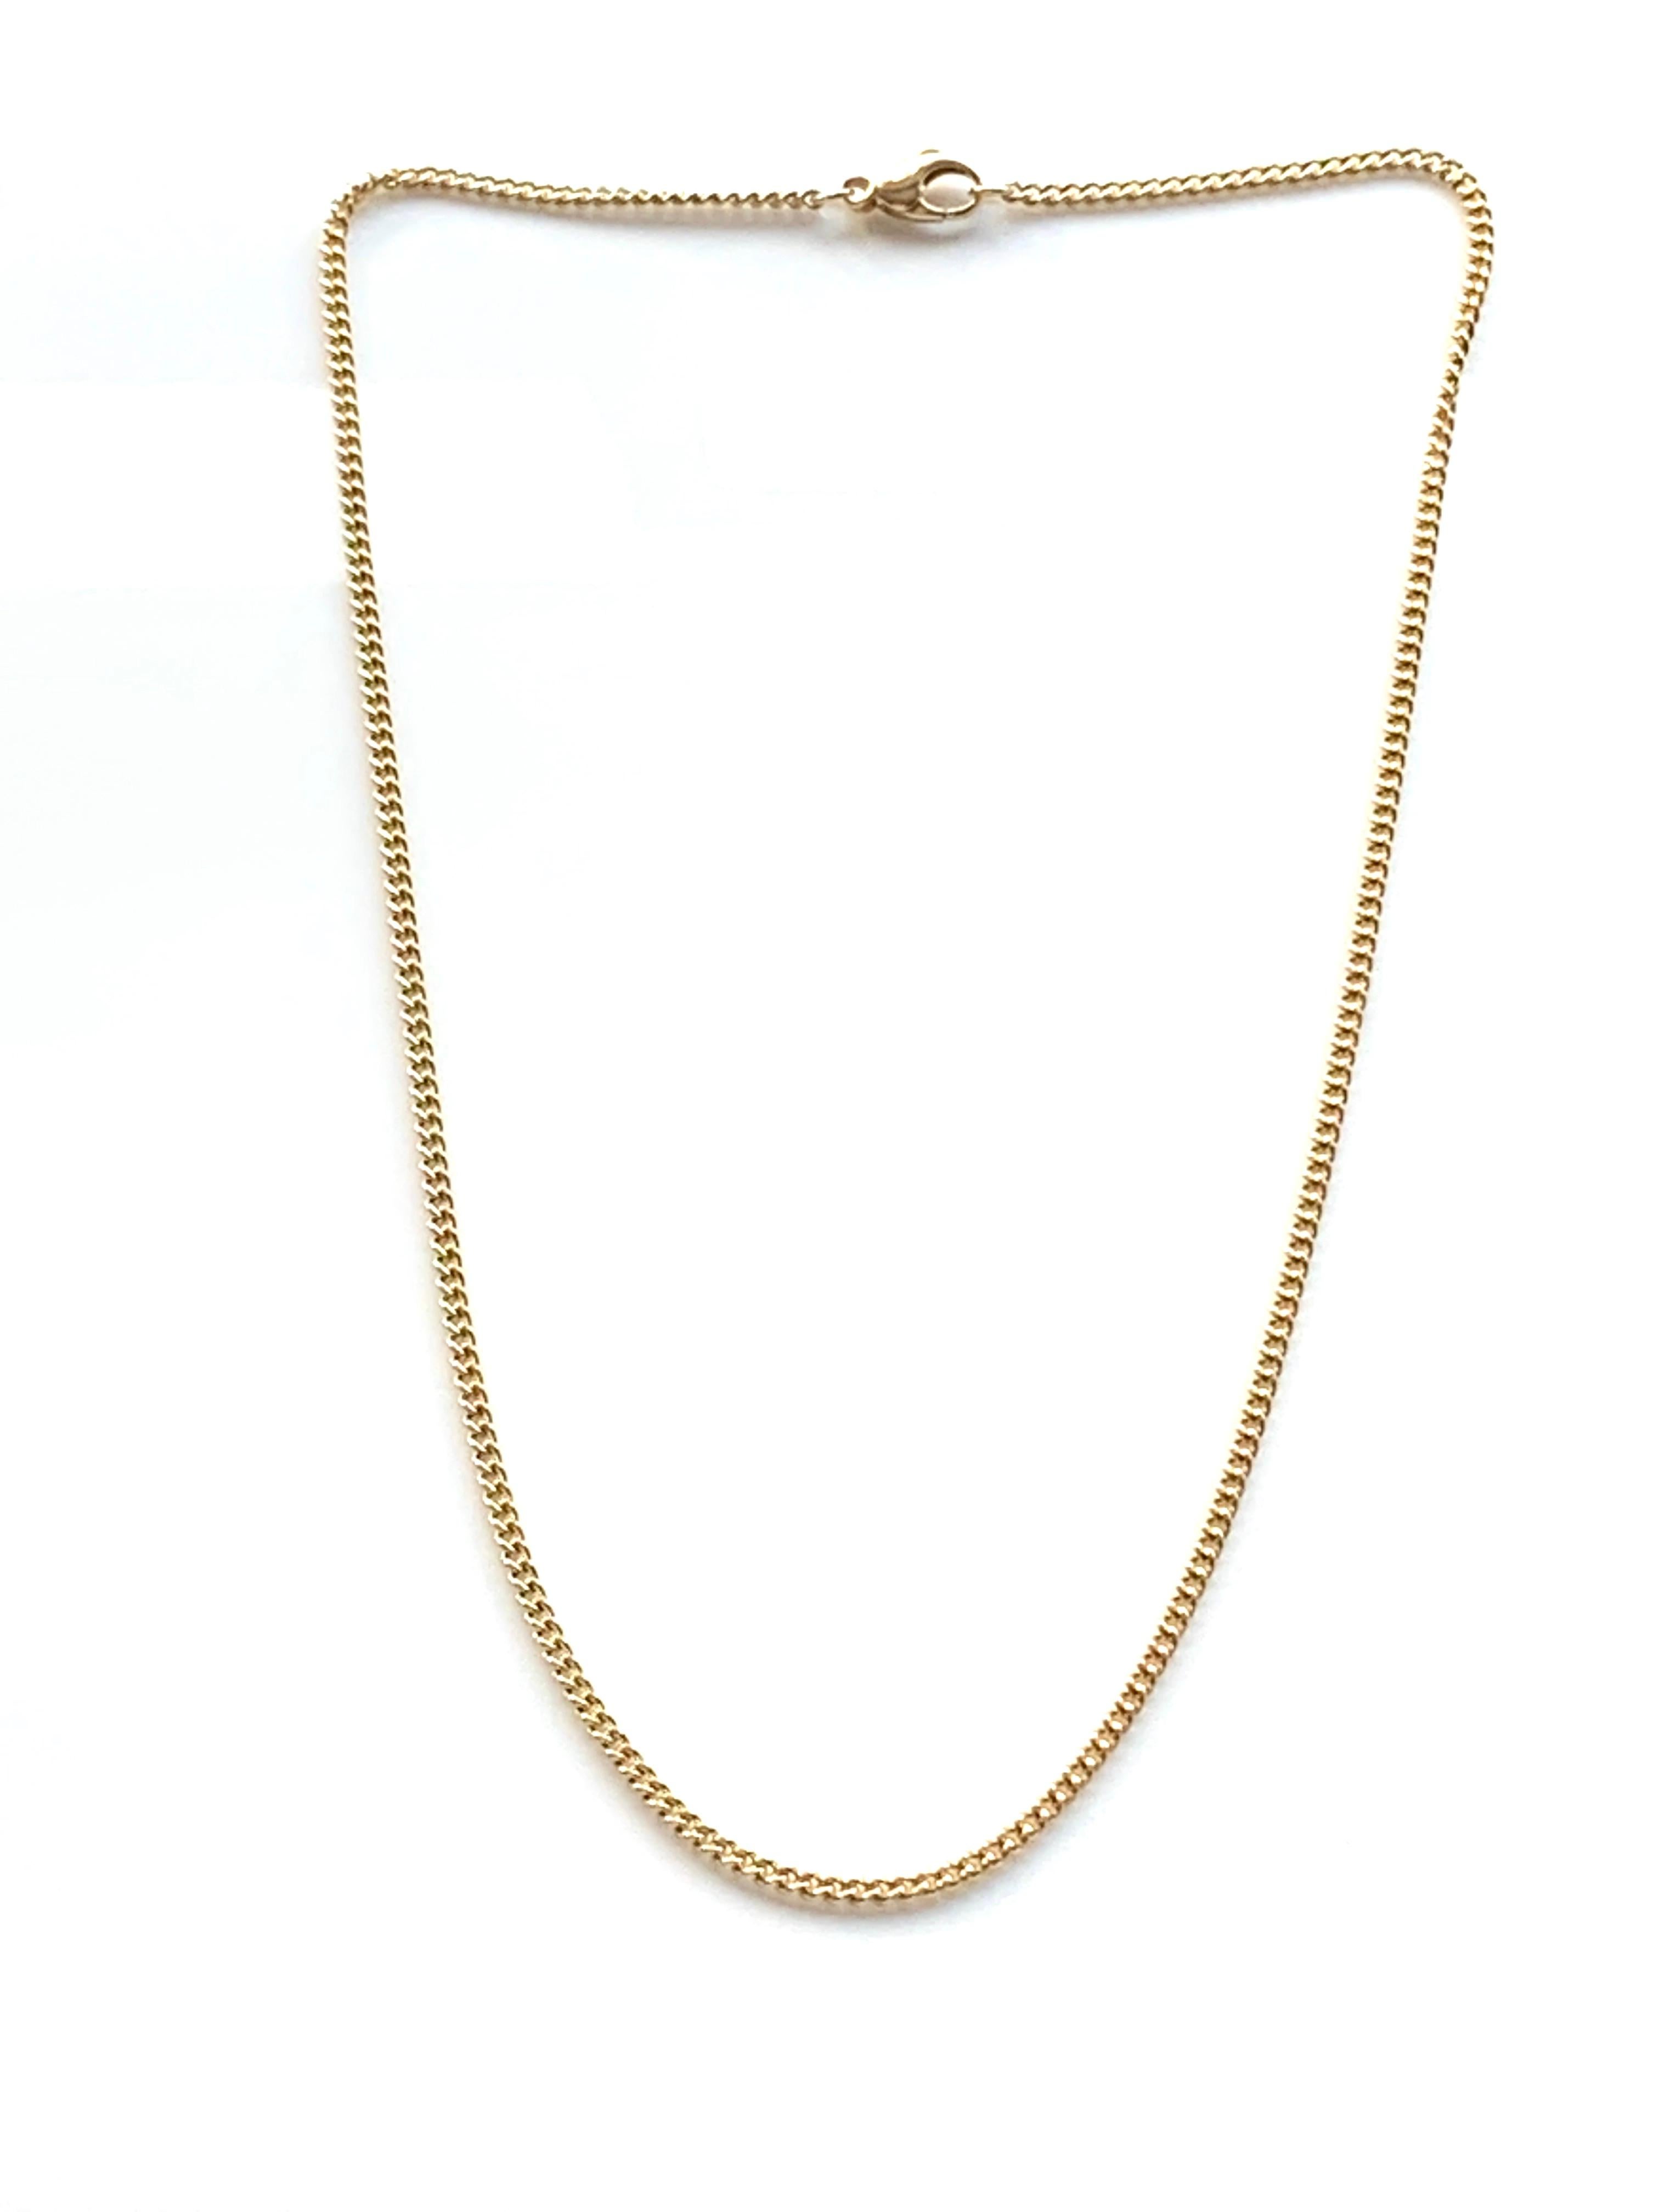 Stunning Modern Chain
9ct Gold Curb 
excellent condition
like new - quality Chain
with large strong clasp
